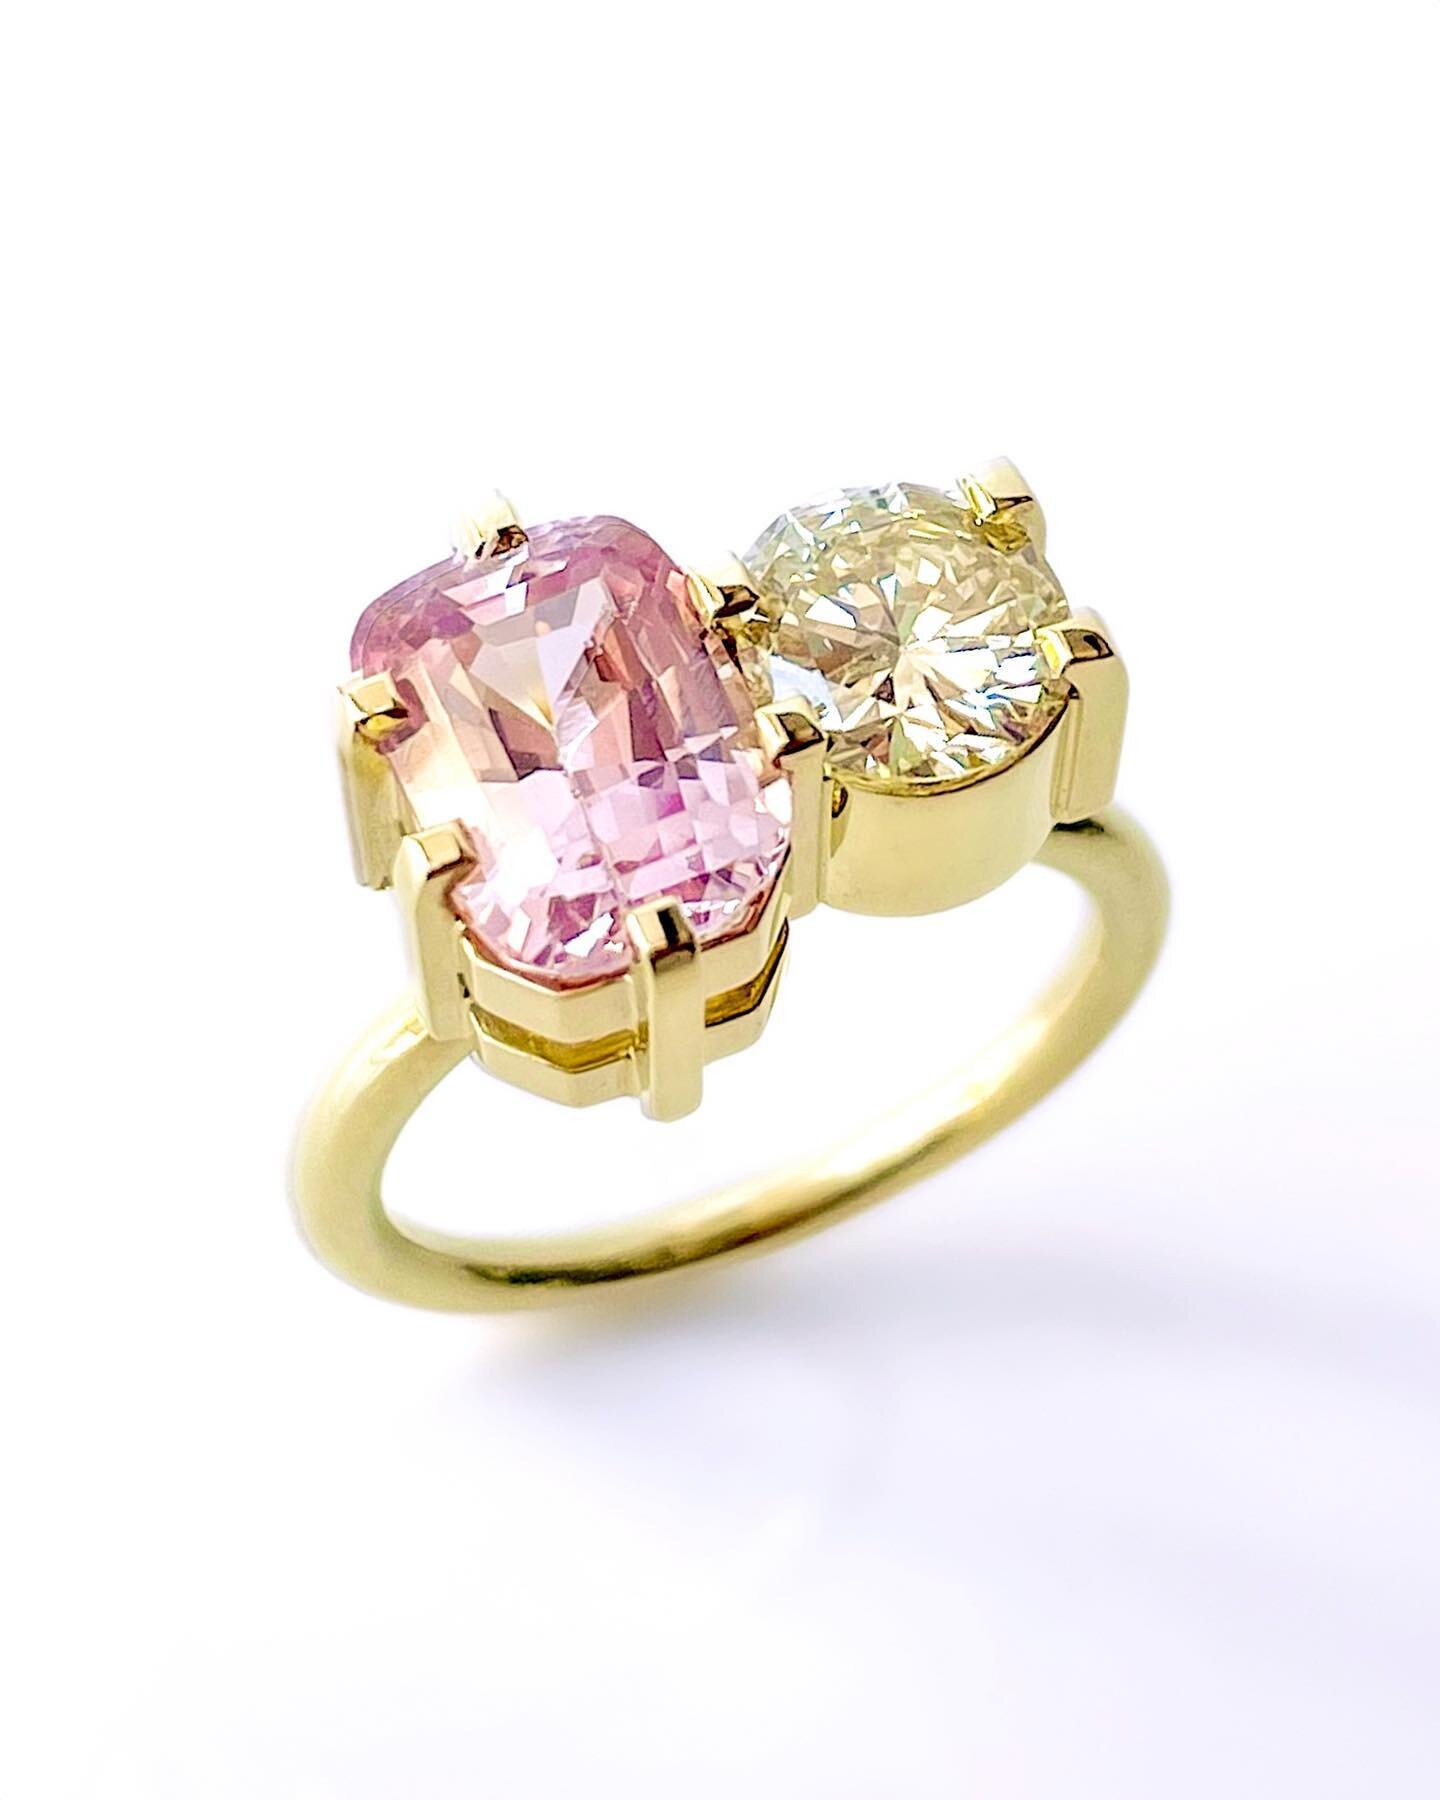 Pink Sapphire and Yellow Diamond set in 14ct yellow gold. 

Each Ida Elsje A N N I E stacking ring is hand made around each stone. They can be worn a single rings or stacked together. 

Follow the hashtag below to see more of the A N N I E COLLECTION